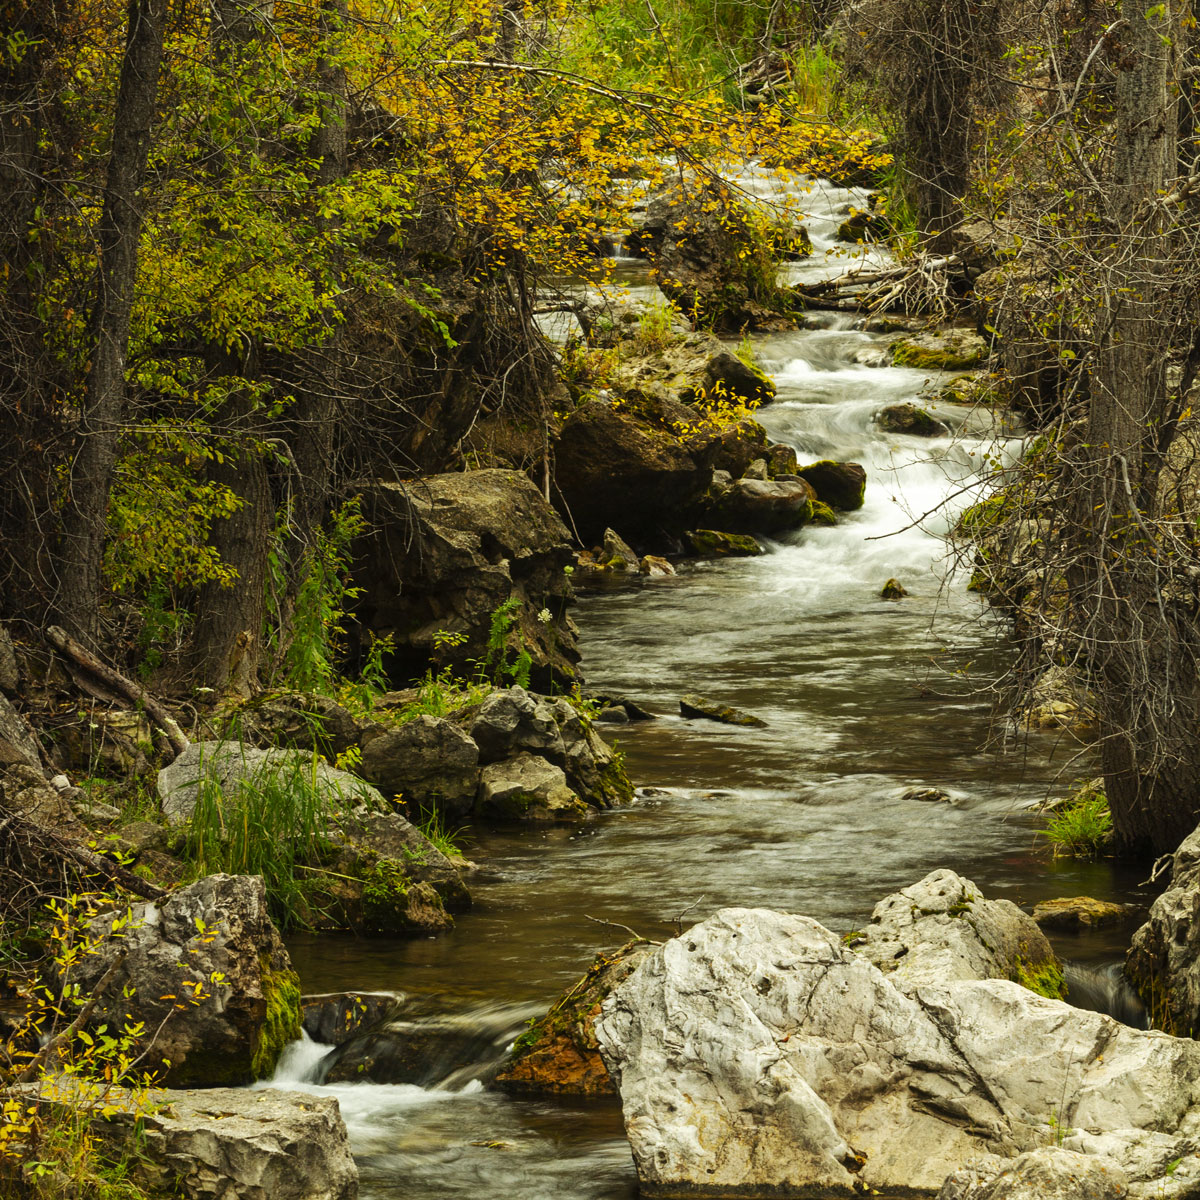 A closeup view of Spearfish Creek flowing over large limestone rocks surrounded by hardwoods in beatiful Autumn colors of yellow and green.